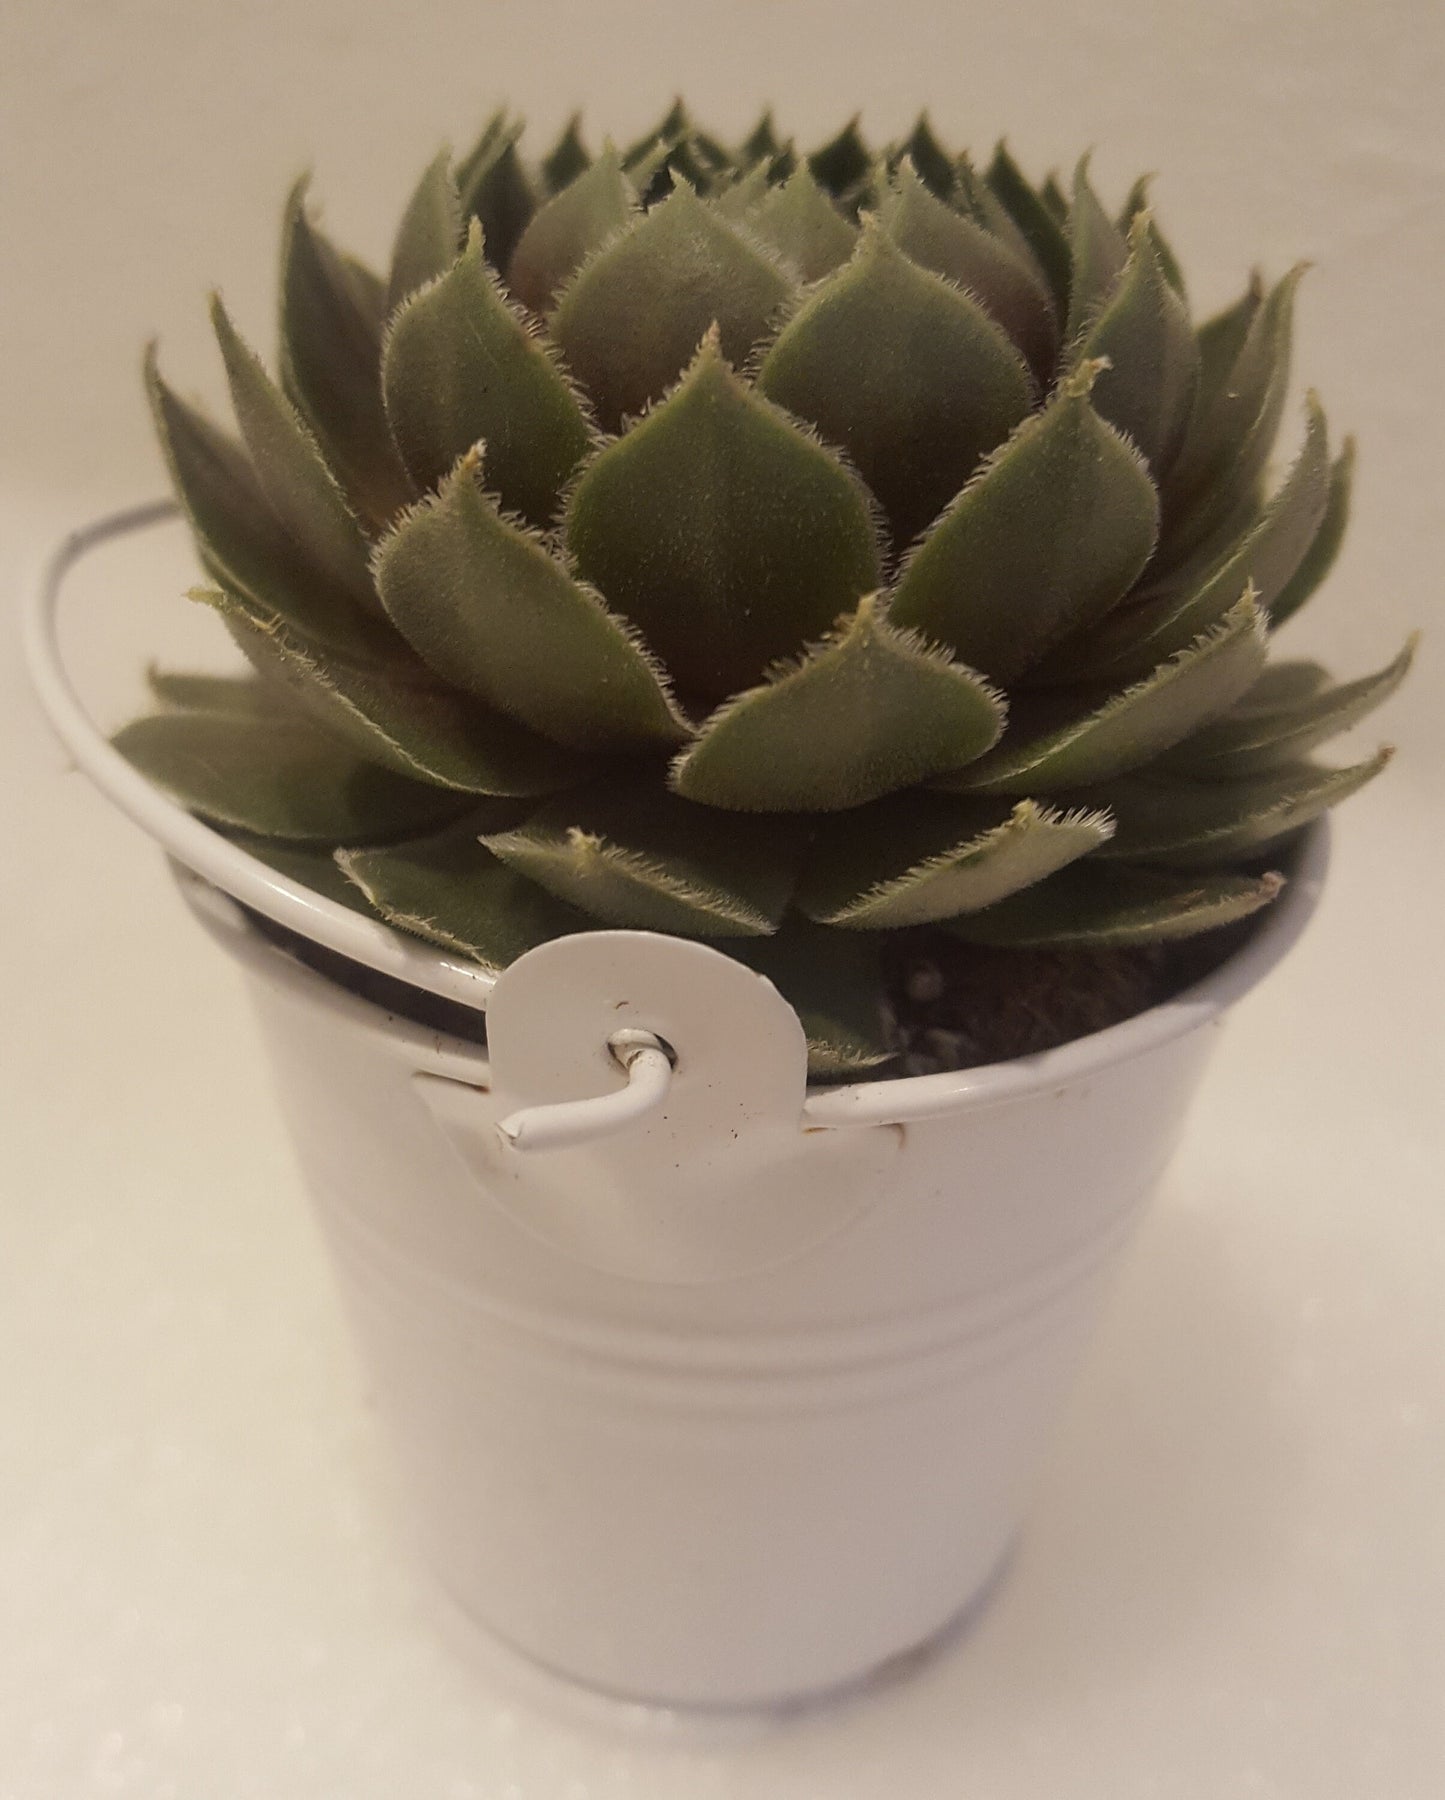 Wedding Favors Live Succulents Party Favor Succulent Weddings White Pails for Wedding and Bridal Shower Decor 3" tall each